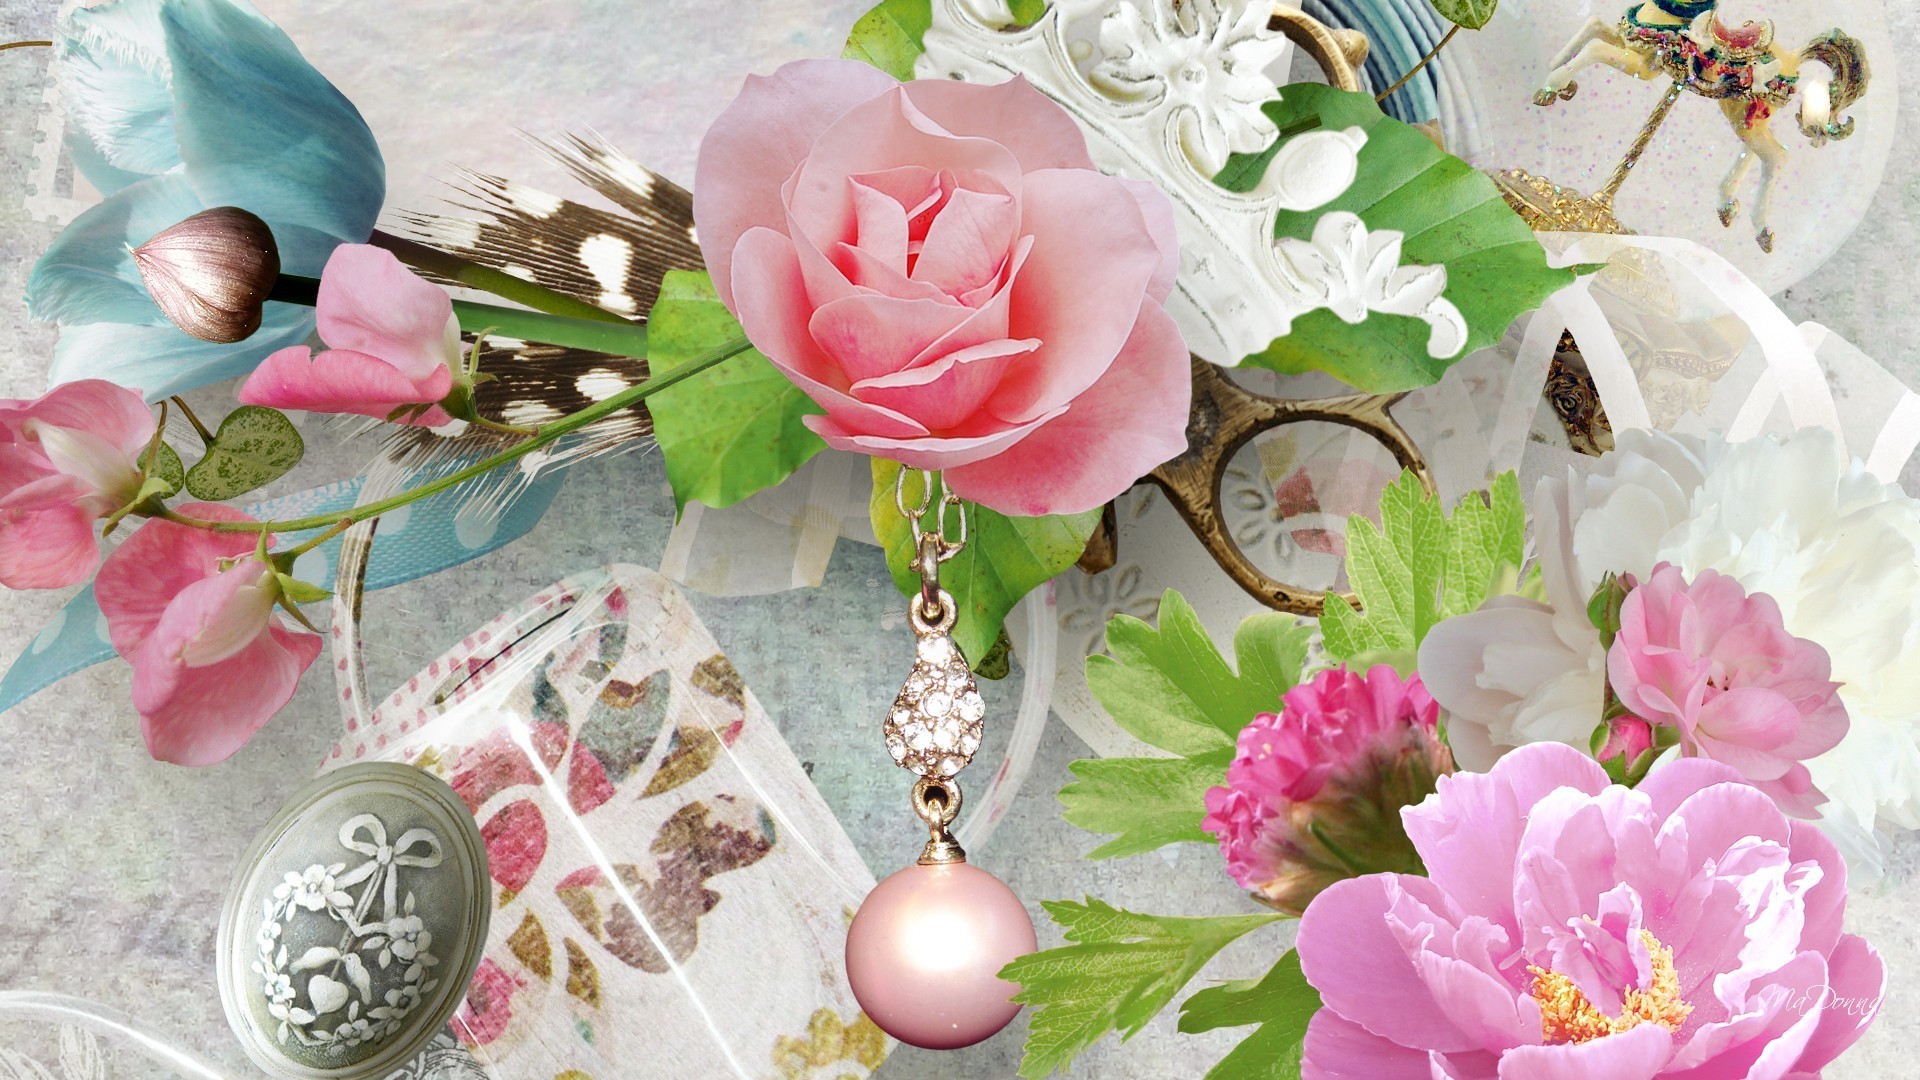 Peonies Tag – Bit Romantic Brooch Peonies Chain Just Flowers Feather Pearls Vintage Roses Daisy Flower